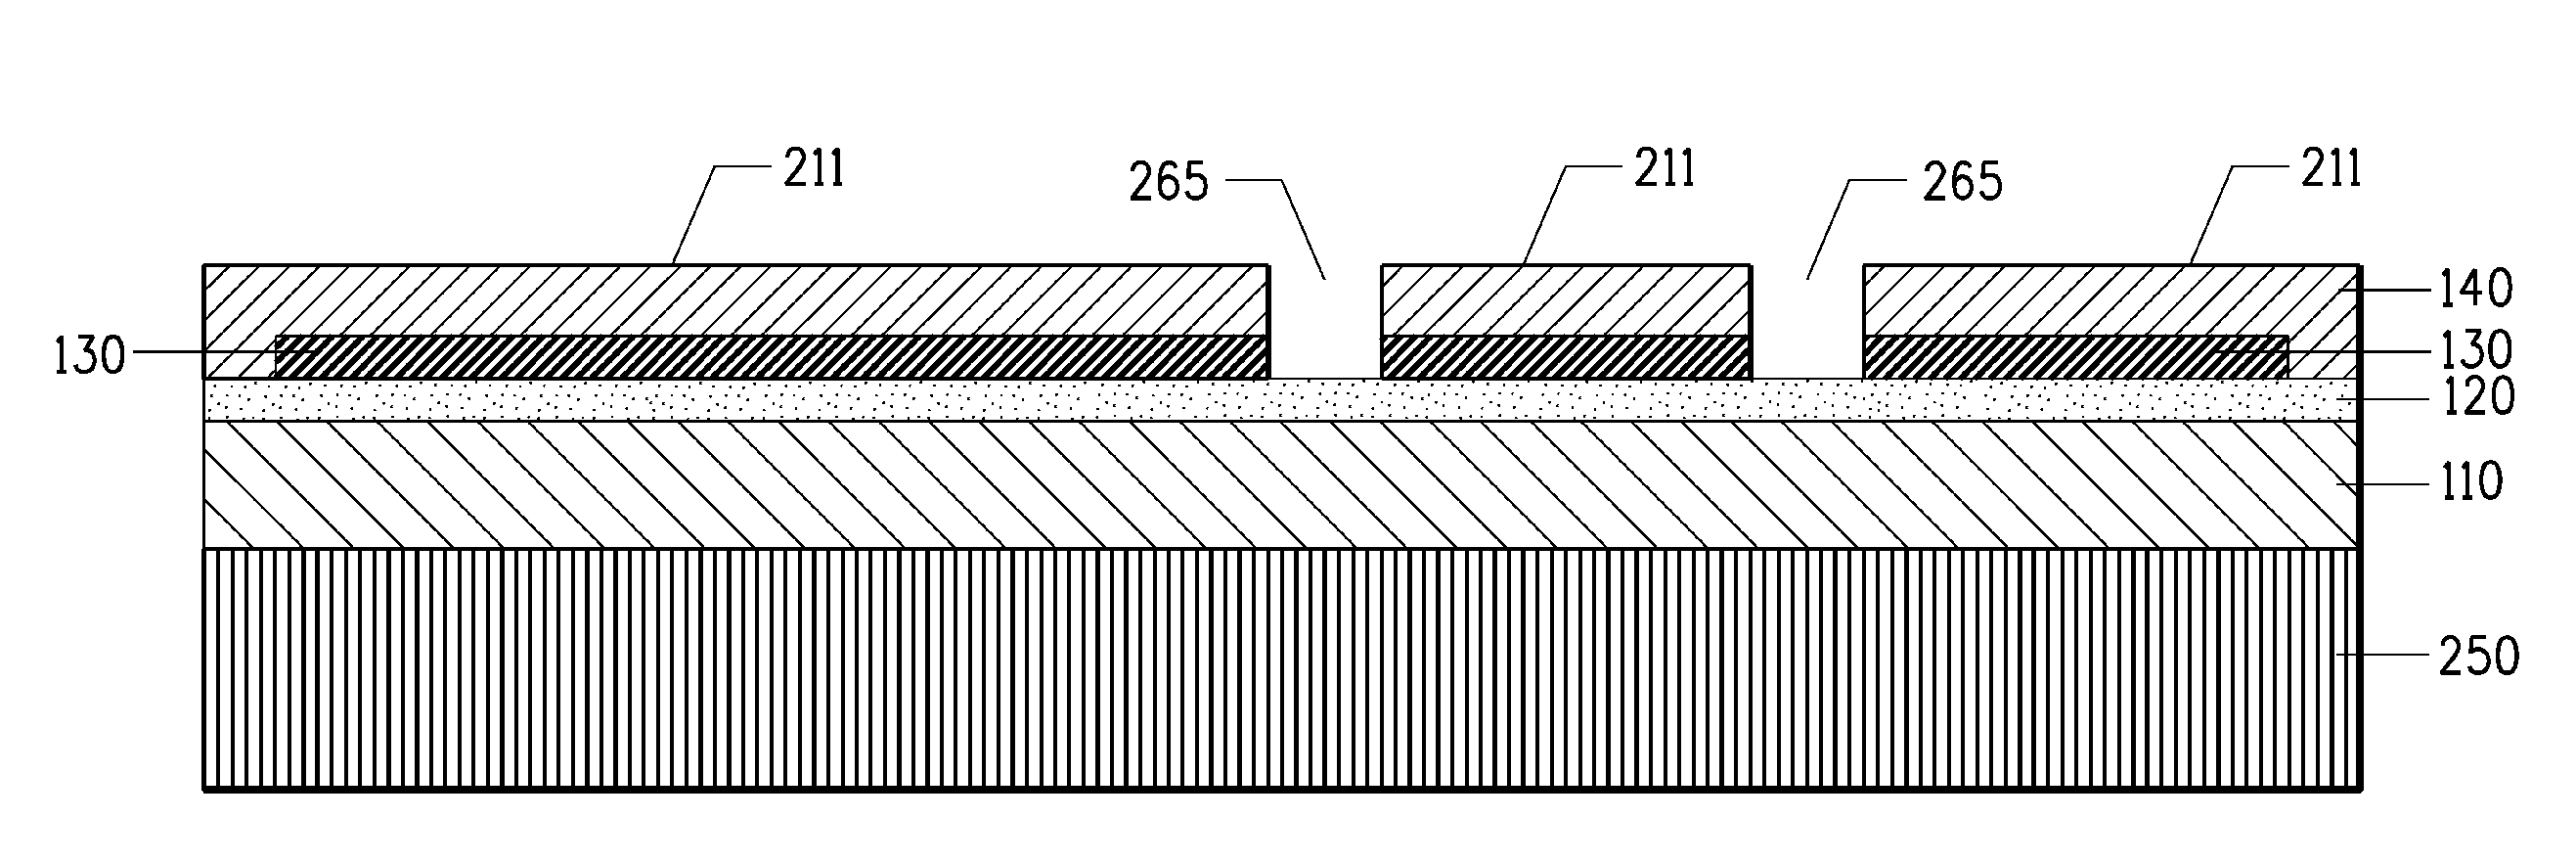 Methods of embedding thin-film capacitors into semiconductor packages using temporary carrier layers